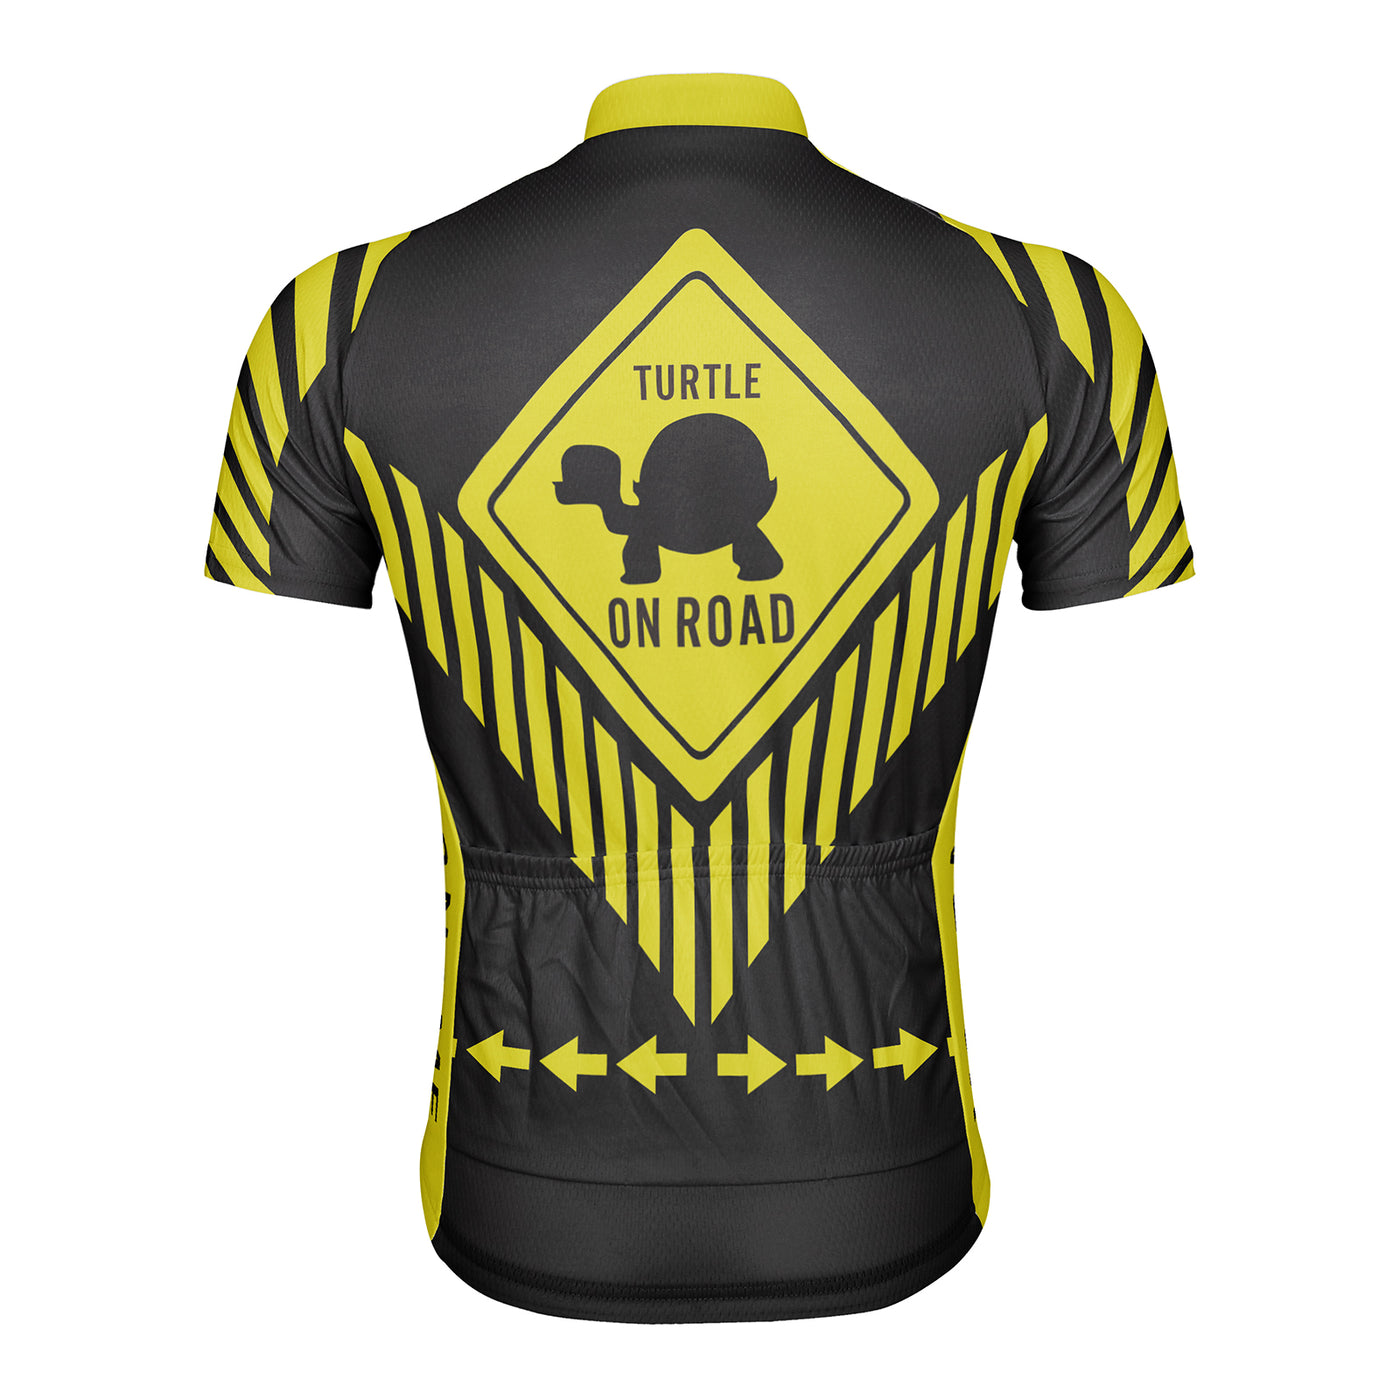 Customized Turtle On Road Men's Cycling Jersey Short Sleeve